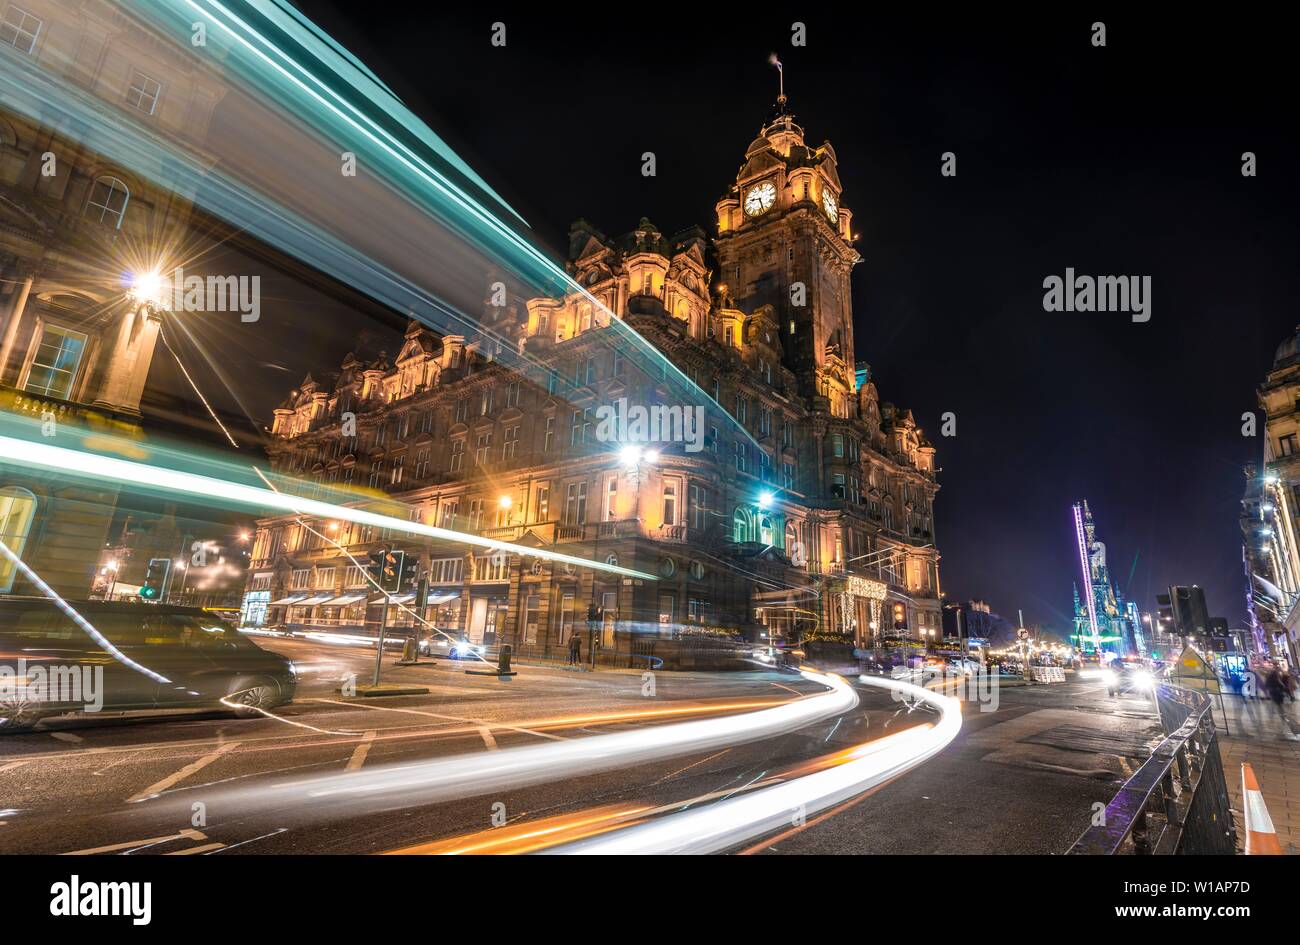 The Balmoral Hotel with light tracks, historic old town at night, Edinburgh, Scotland, Great Britain Stock Photo